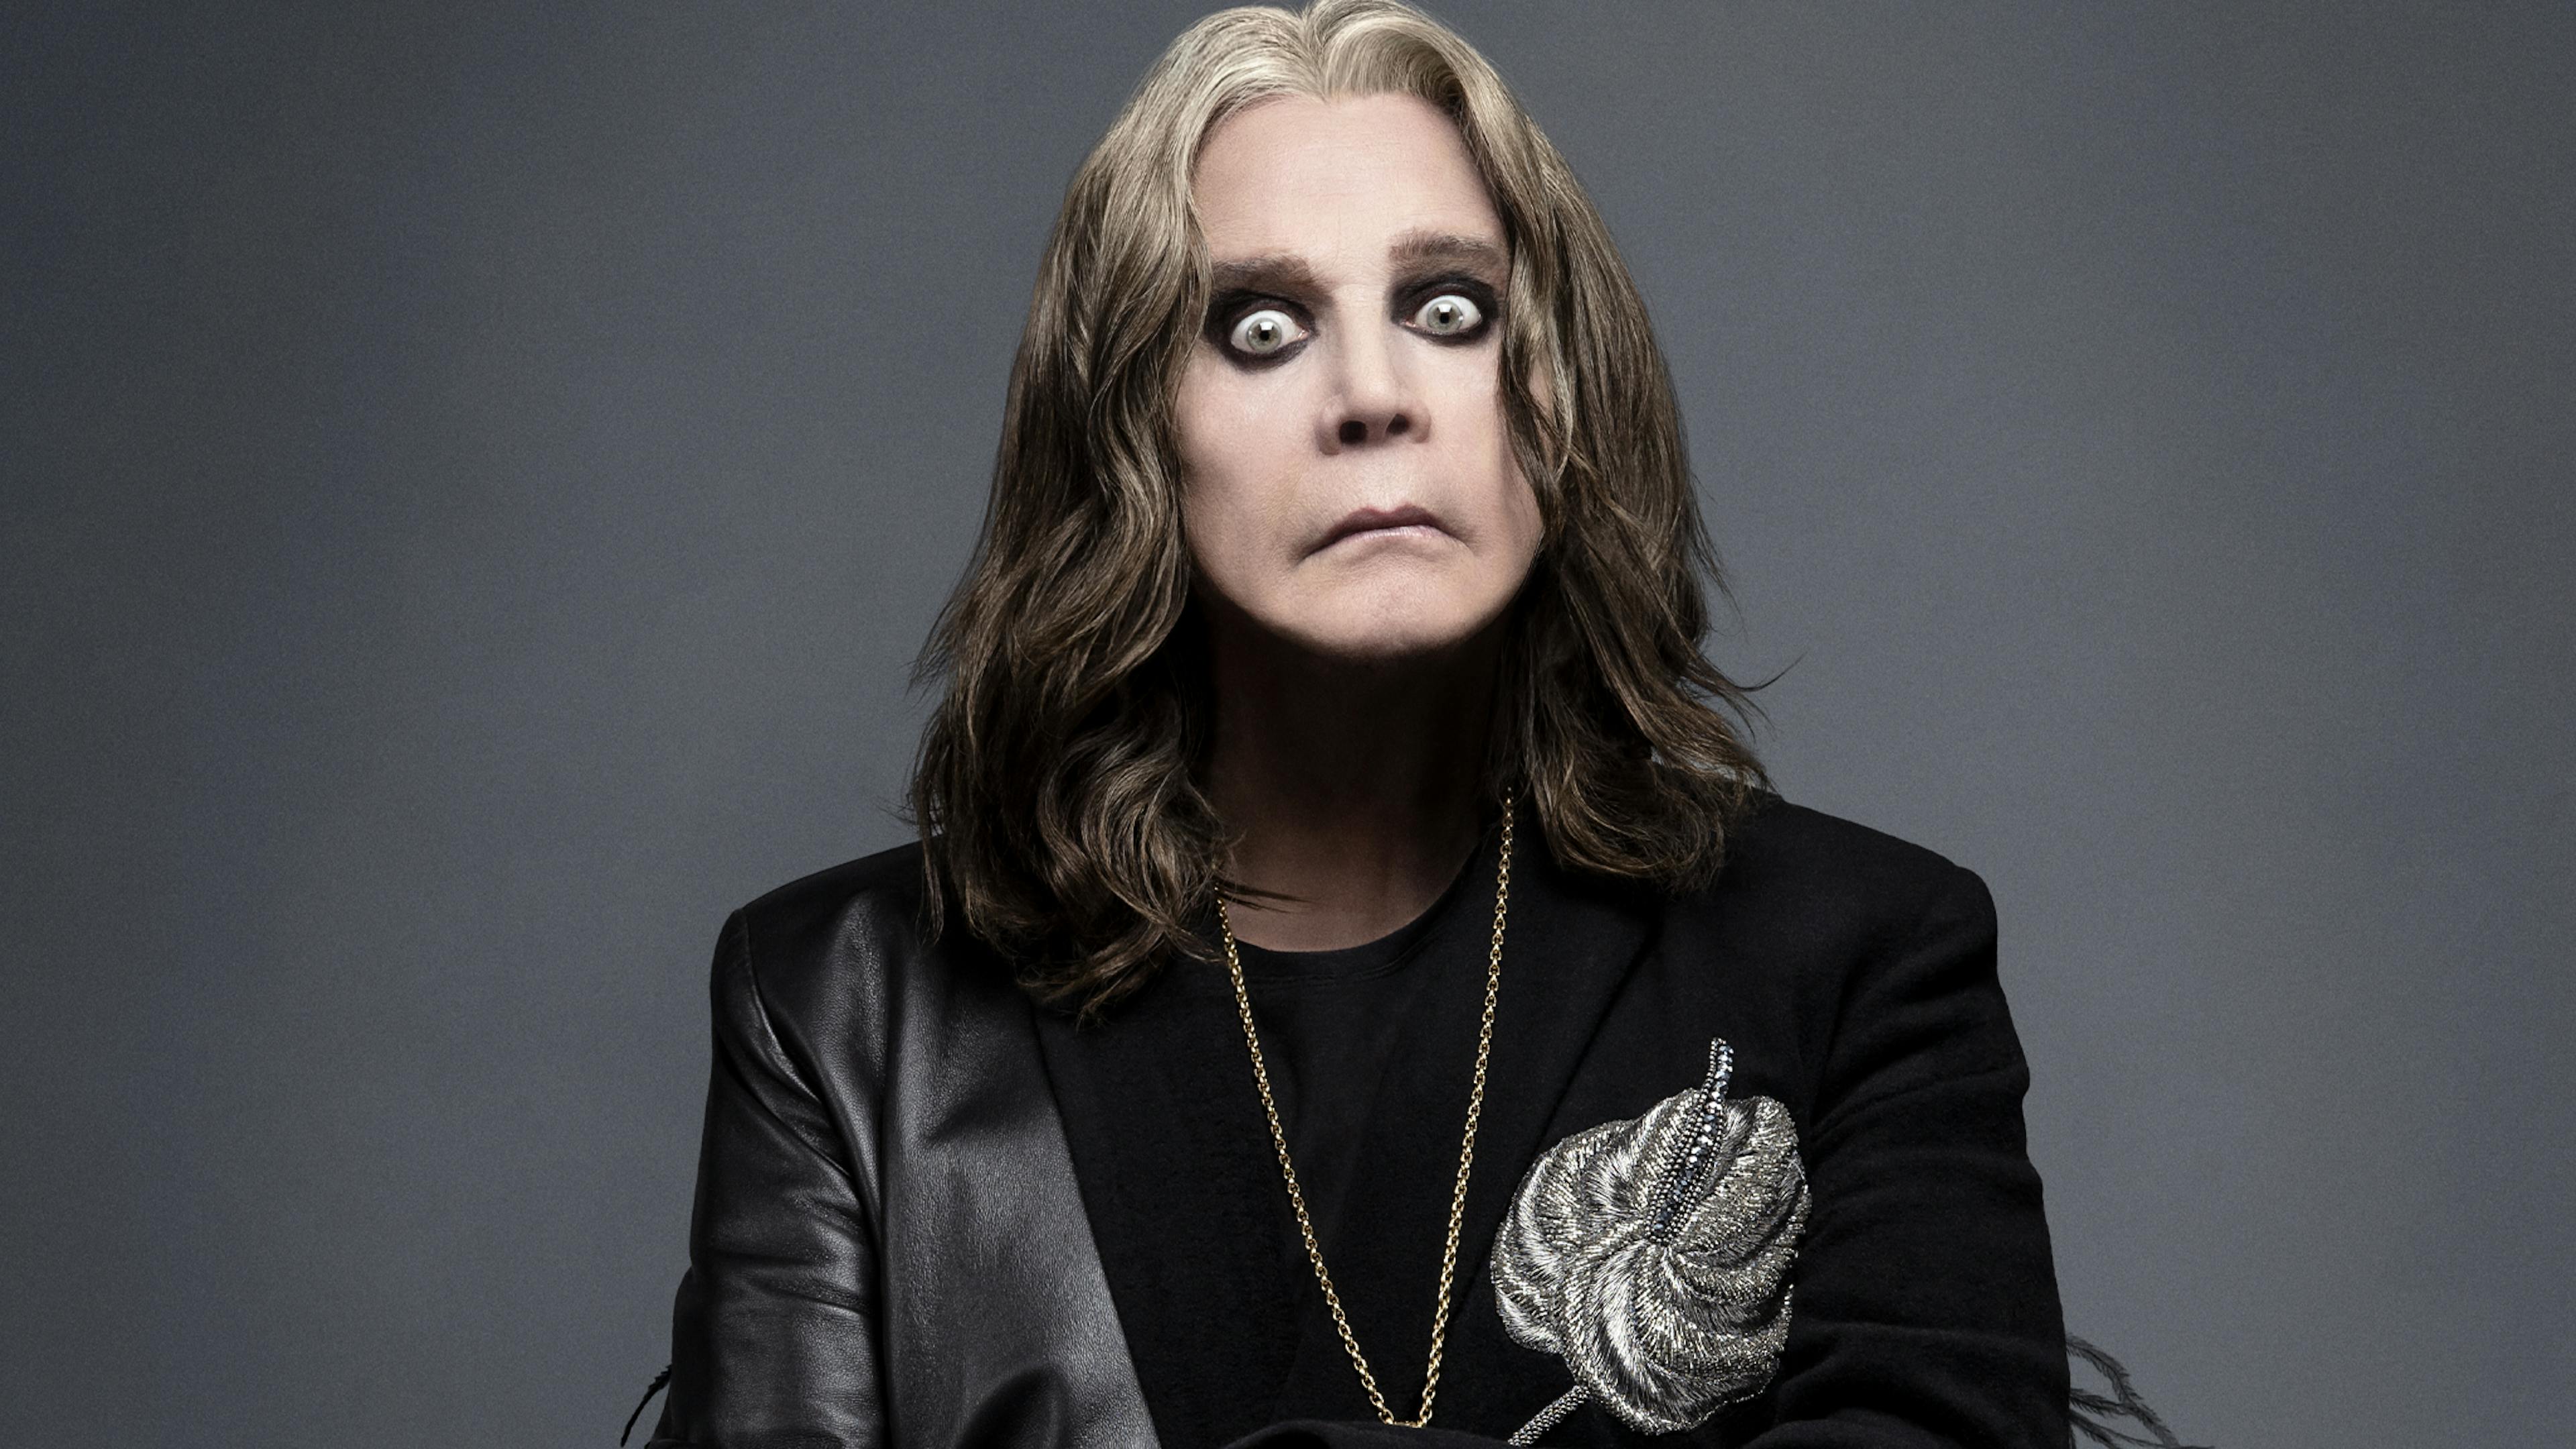 Ozzy Osbourne on moving to the UK: “To be honest with you, I don’t want to go back”